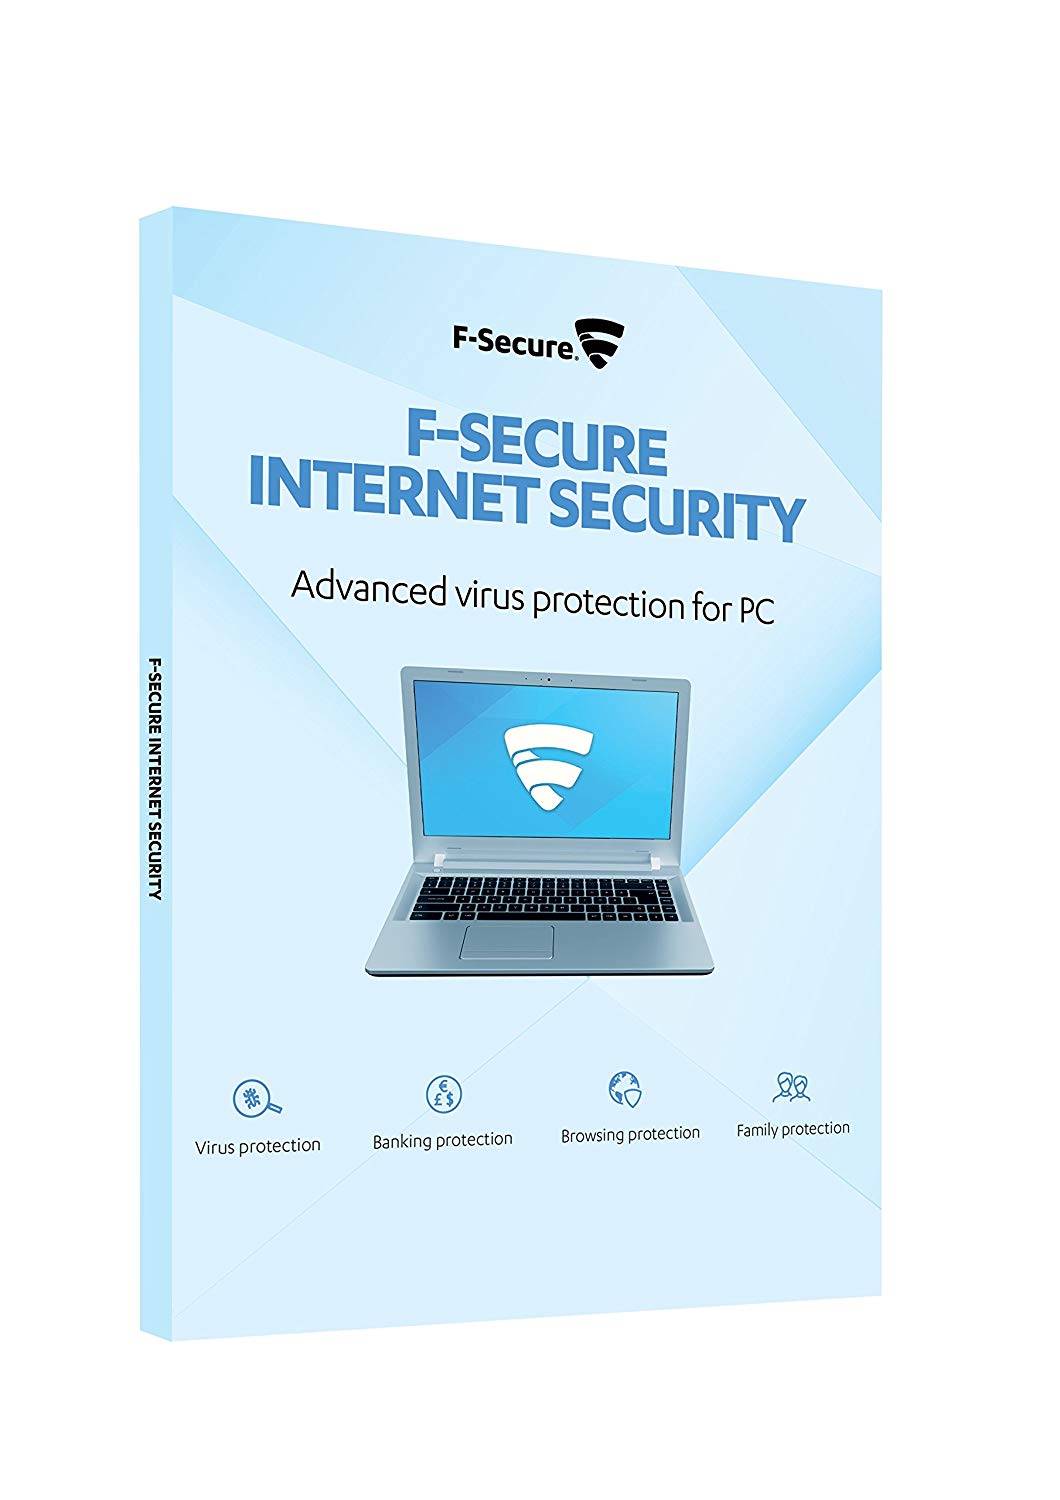 F-Secure Internet Security CD Key (Digital Download) - Various Options Available: 3 Devices